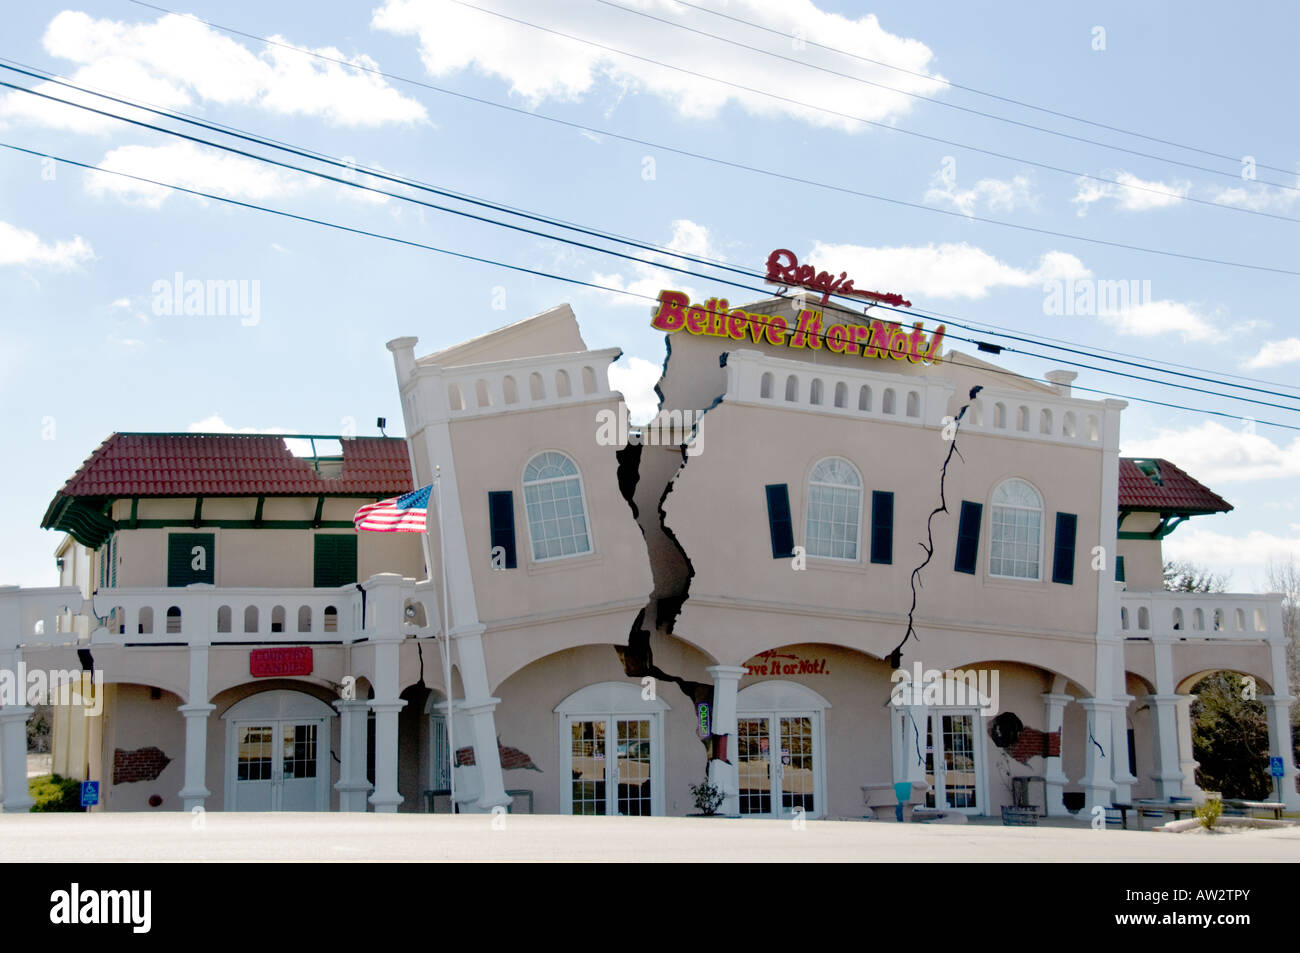 Ripley's Believe IT or Not Museum situato a Branson, Missouri, USA. Foto Stock